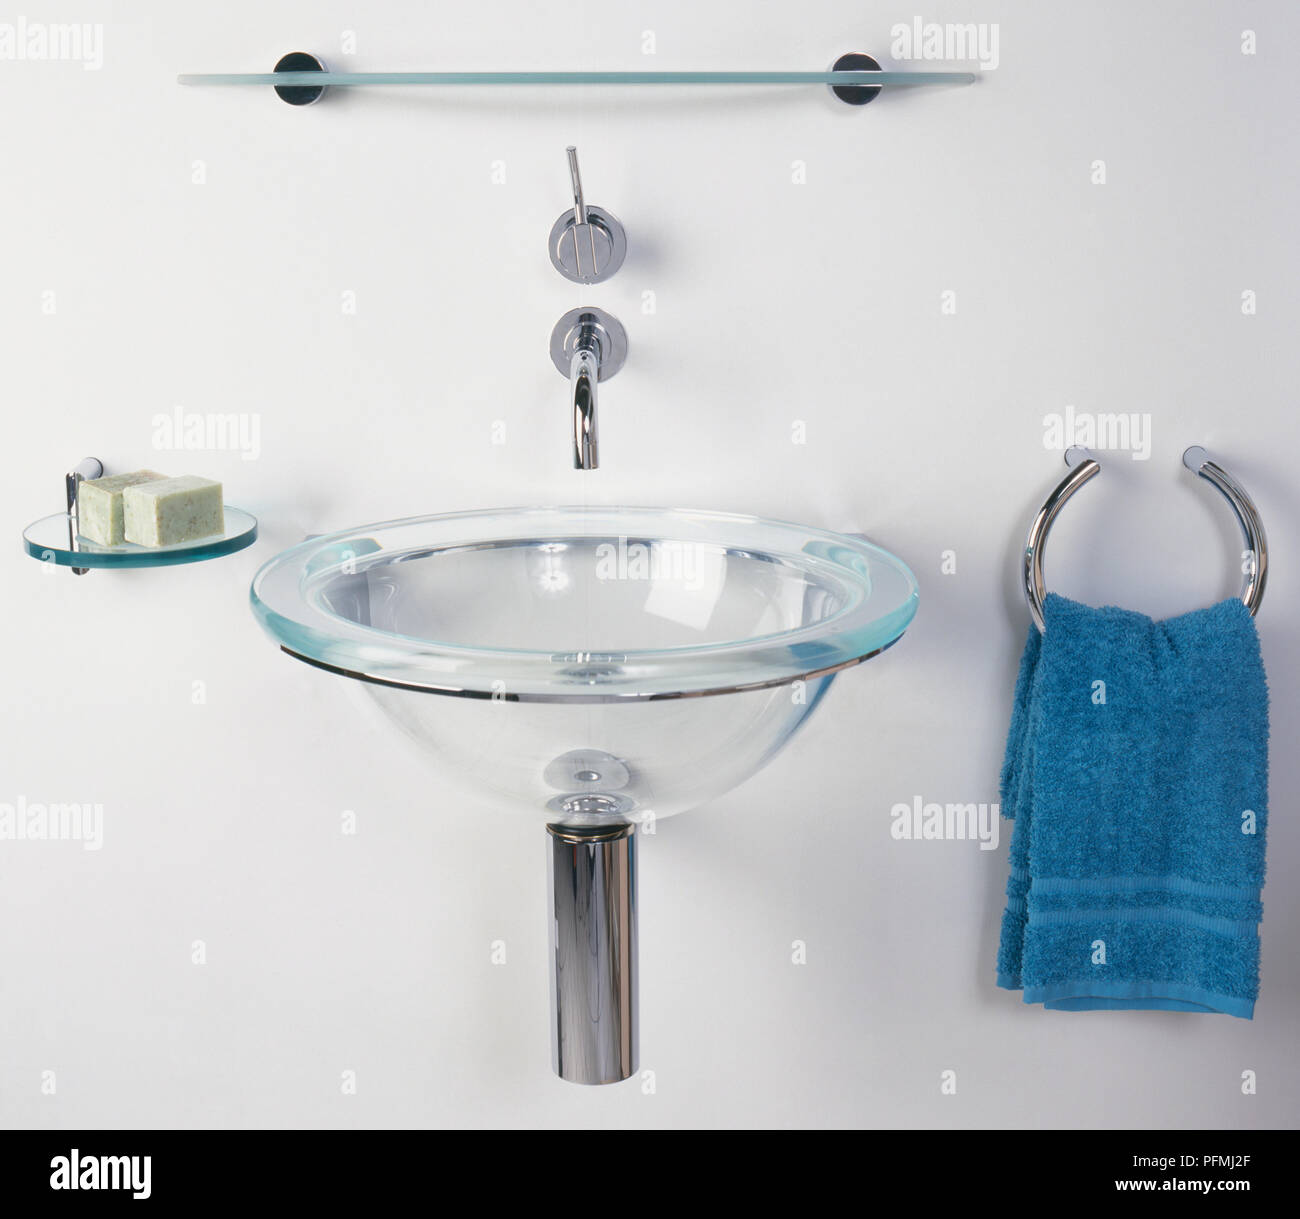 Glass basin sink in bathroom, with wall-mounted tap, soap dish, shelf, and towel  holder Stock Photo - Alamy